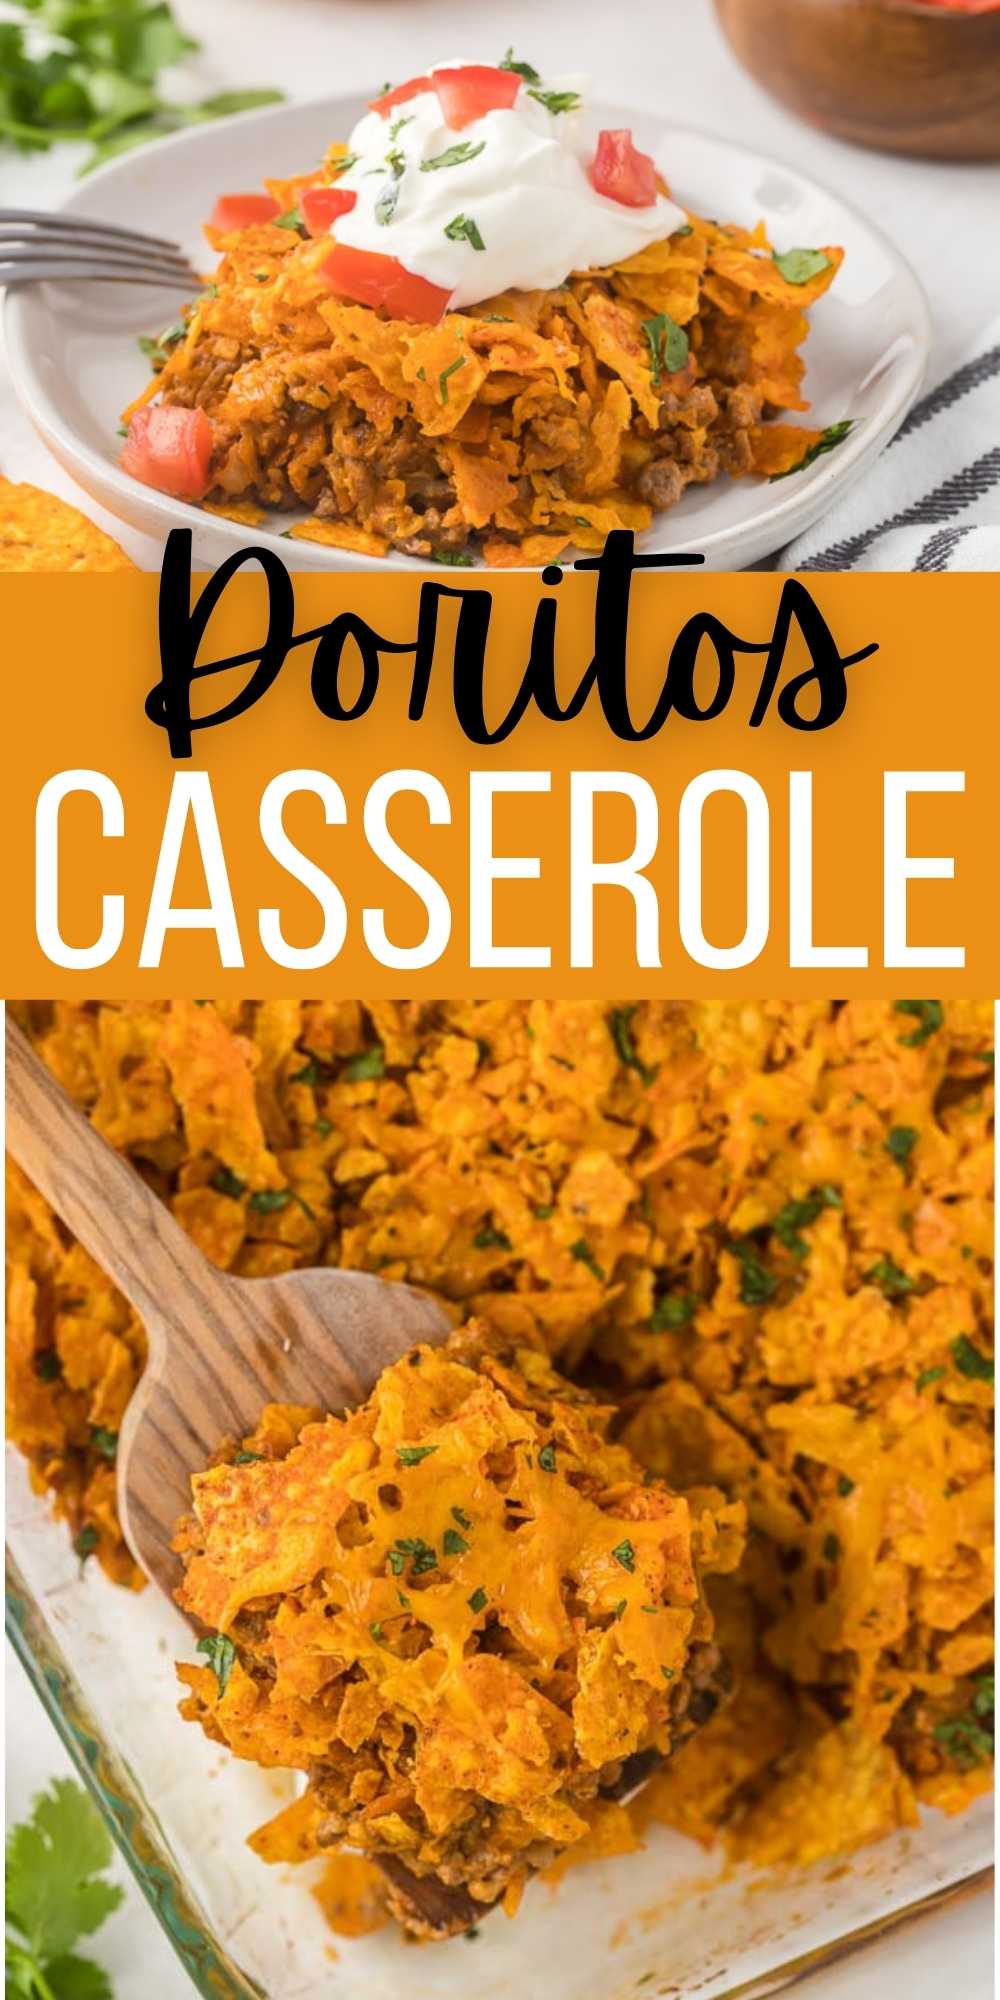 This Doritos Casserole is layered with ground beef, taco seasoning, and Doritos. All of the ingredients combine make the best casserole. The entire family will love this Doritos casserole with ground beef.  #eatingonadime #casserolerecipes #beefrecipes #doritosrecipes 
